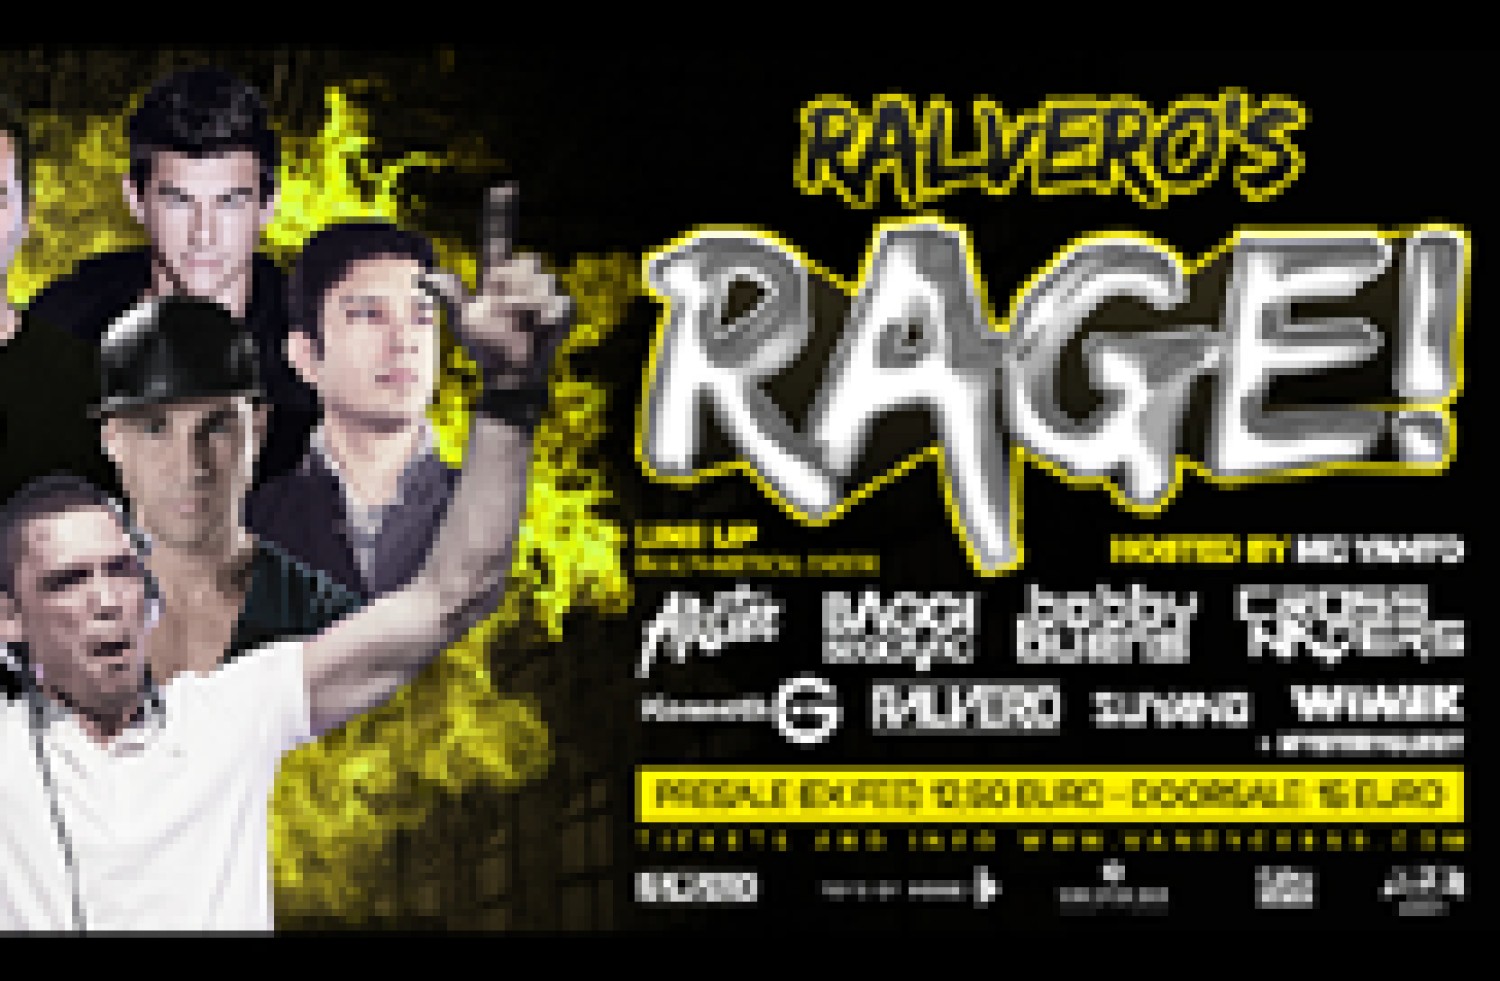 Party nieuws: It's time for an epic new episode of Ralvero's Rage!